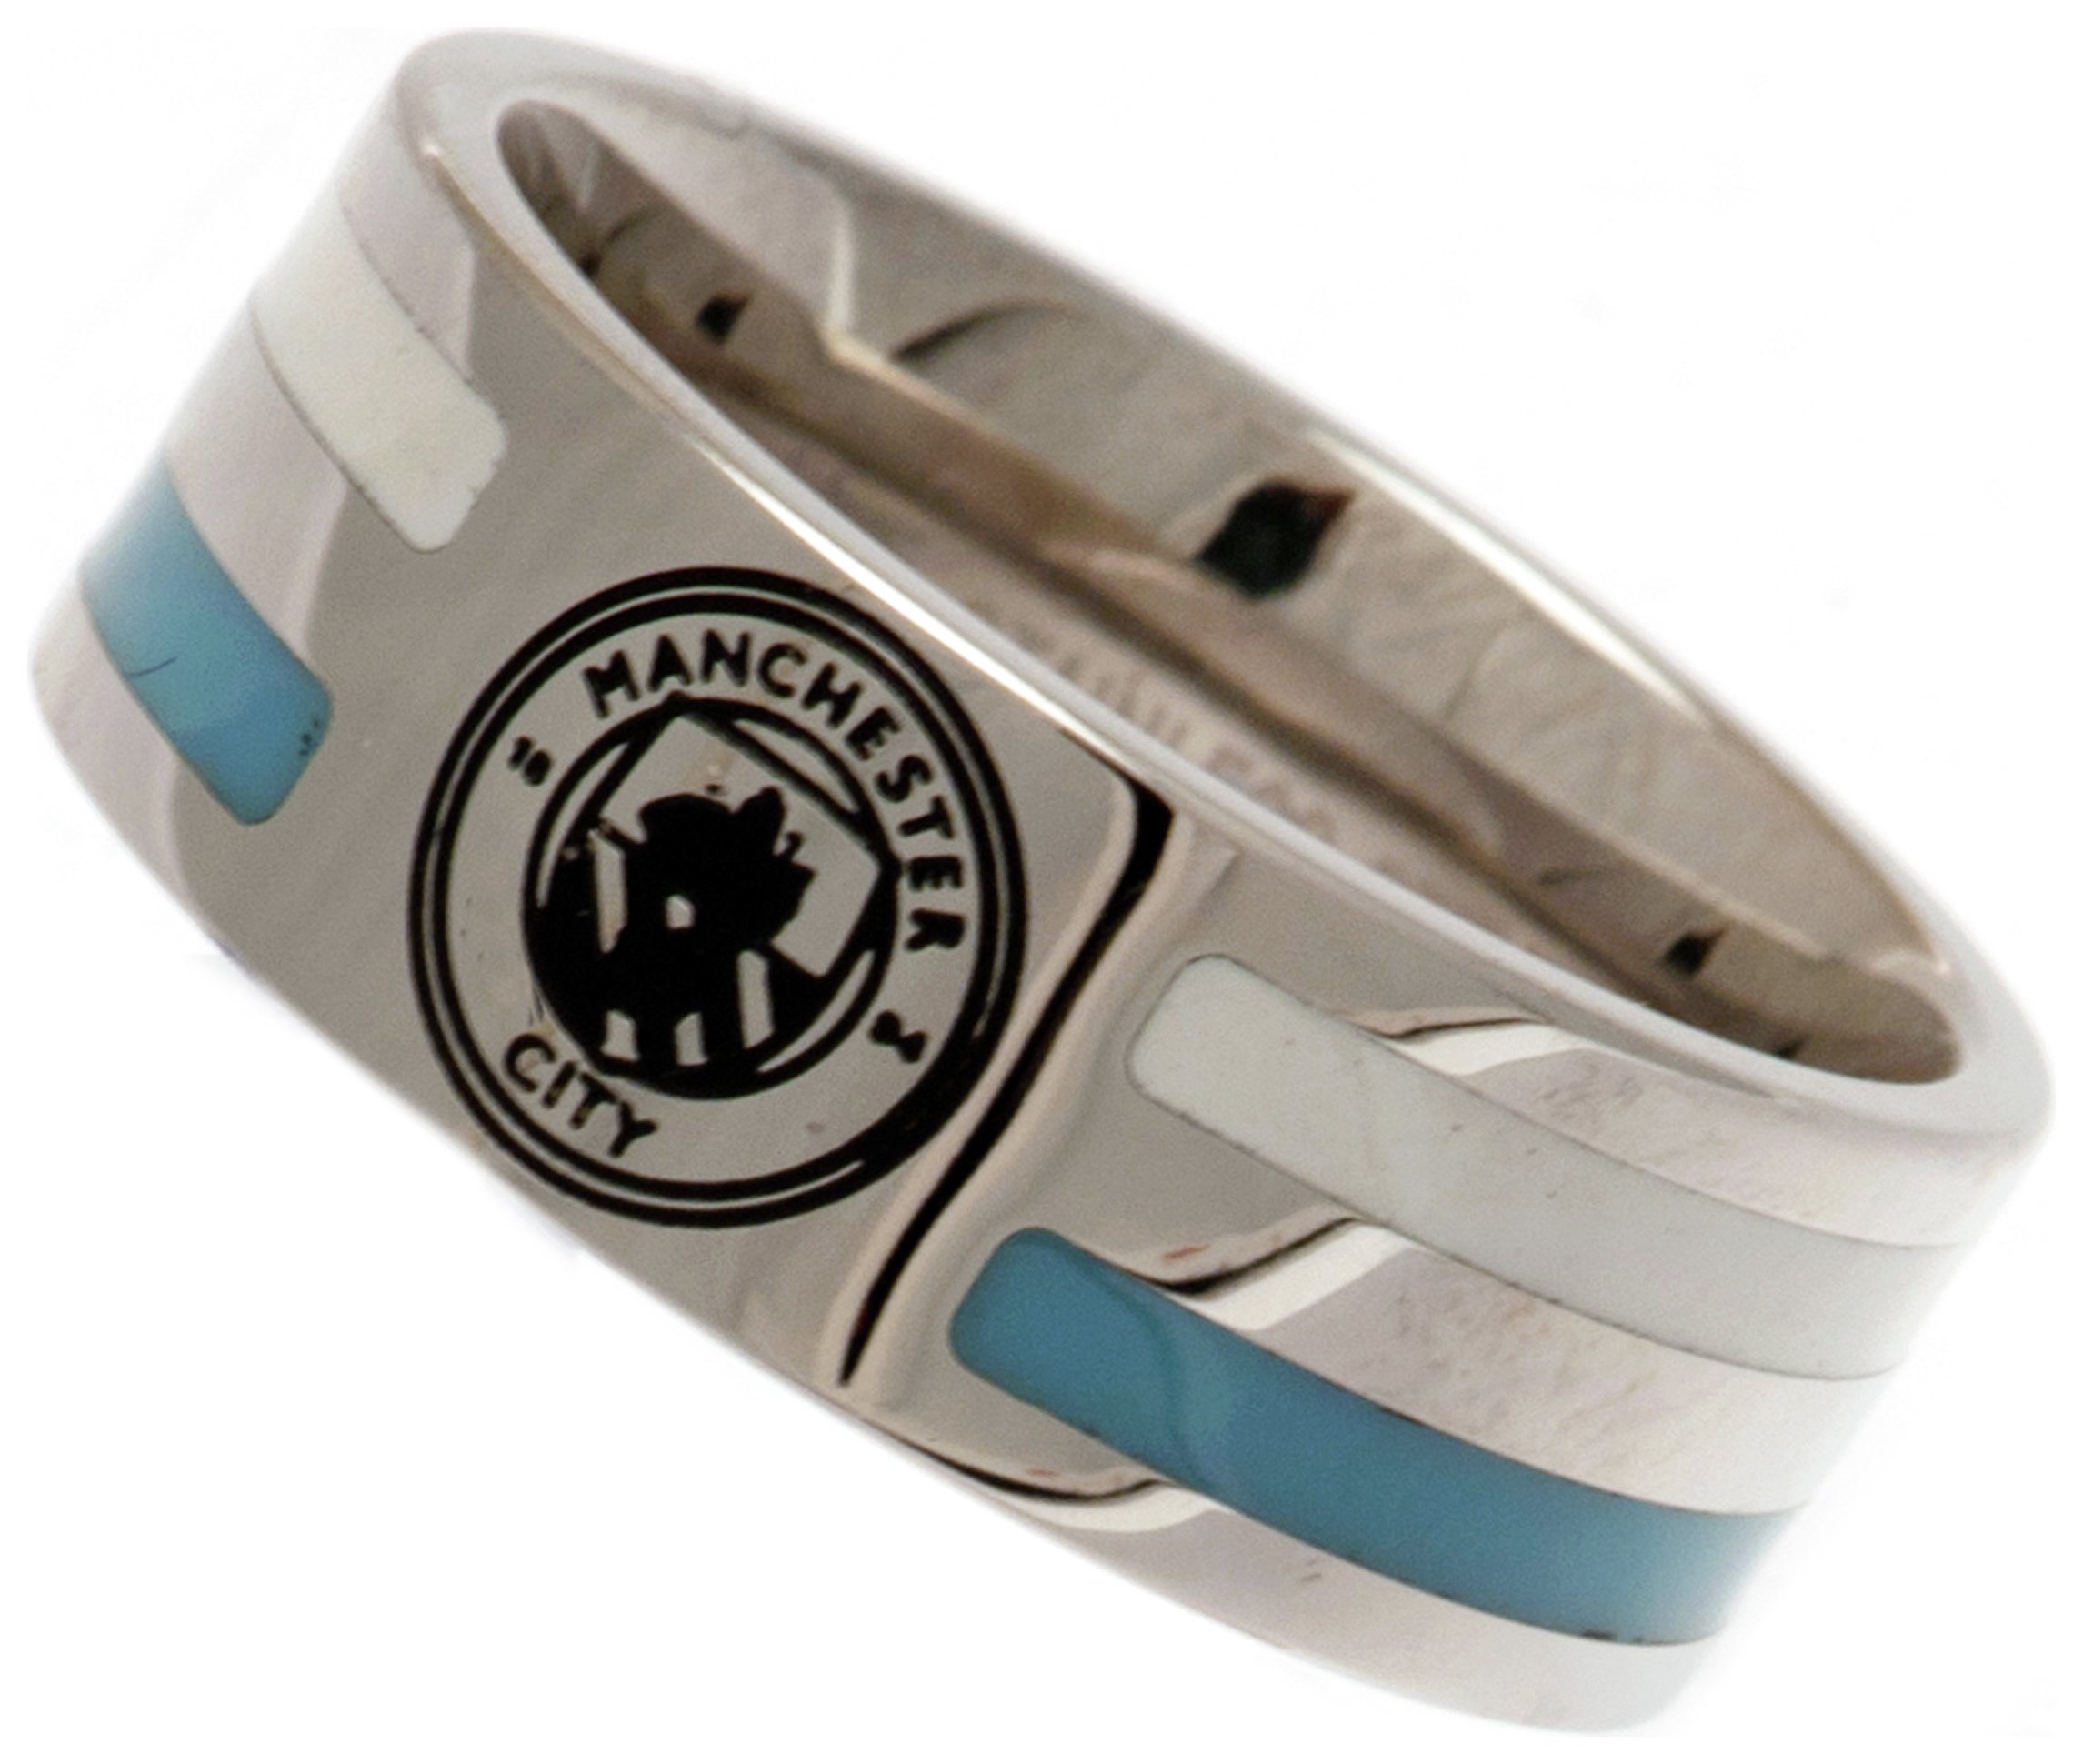 Stainless Steel Man City Striped Ring - Size U